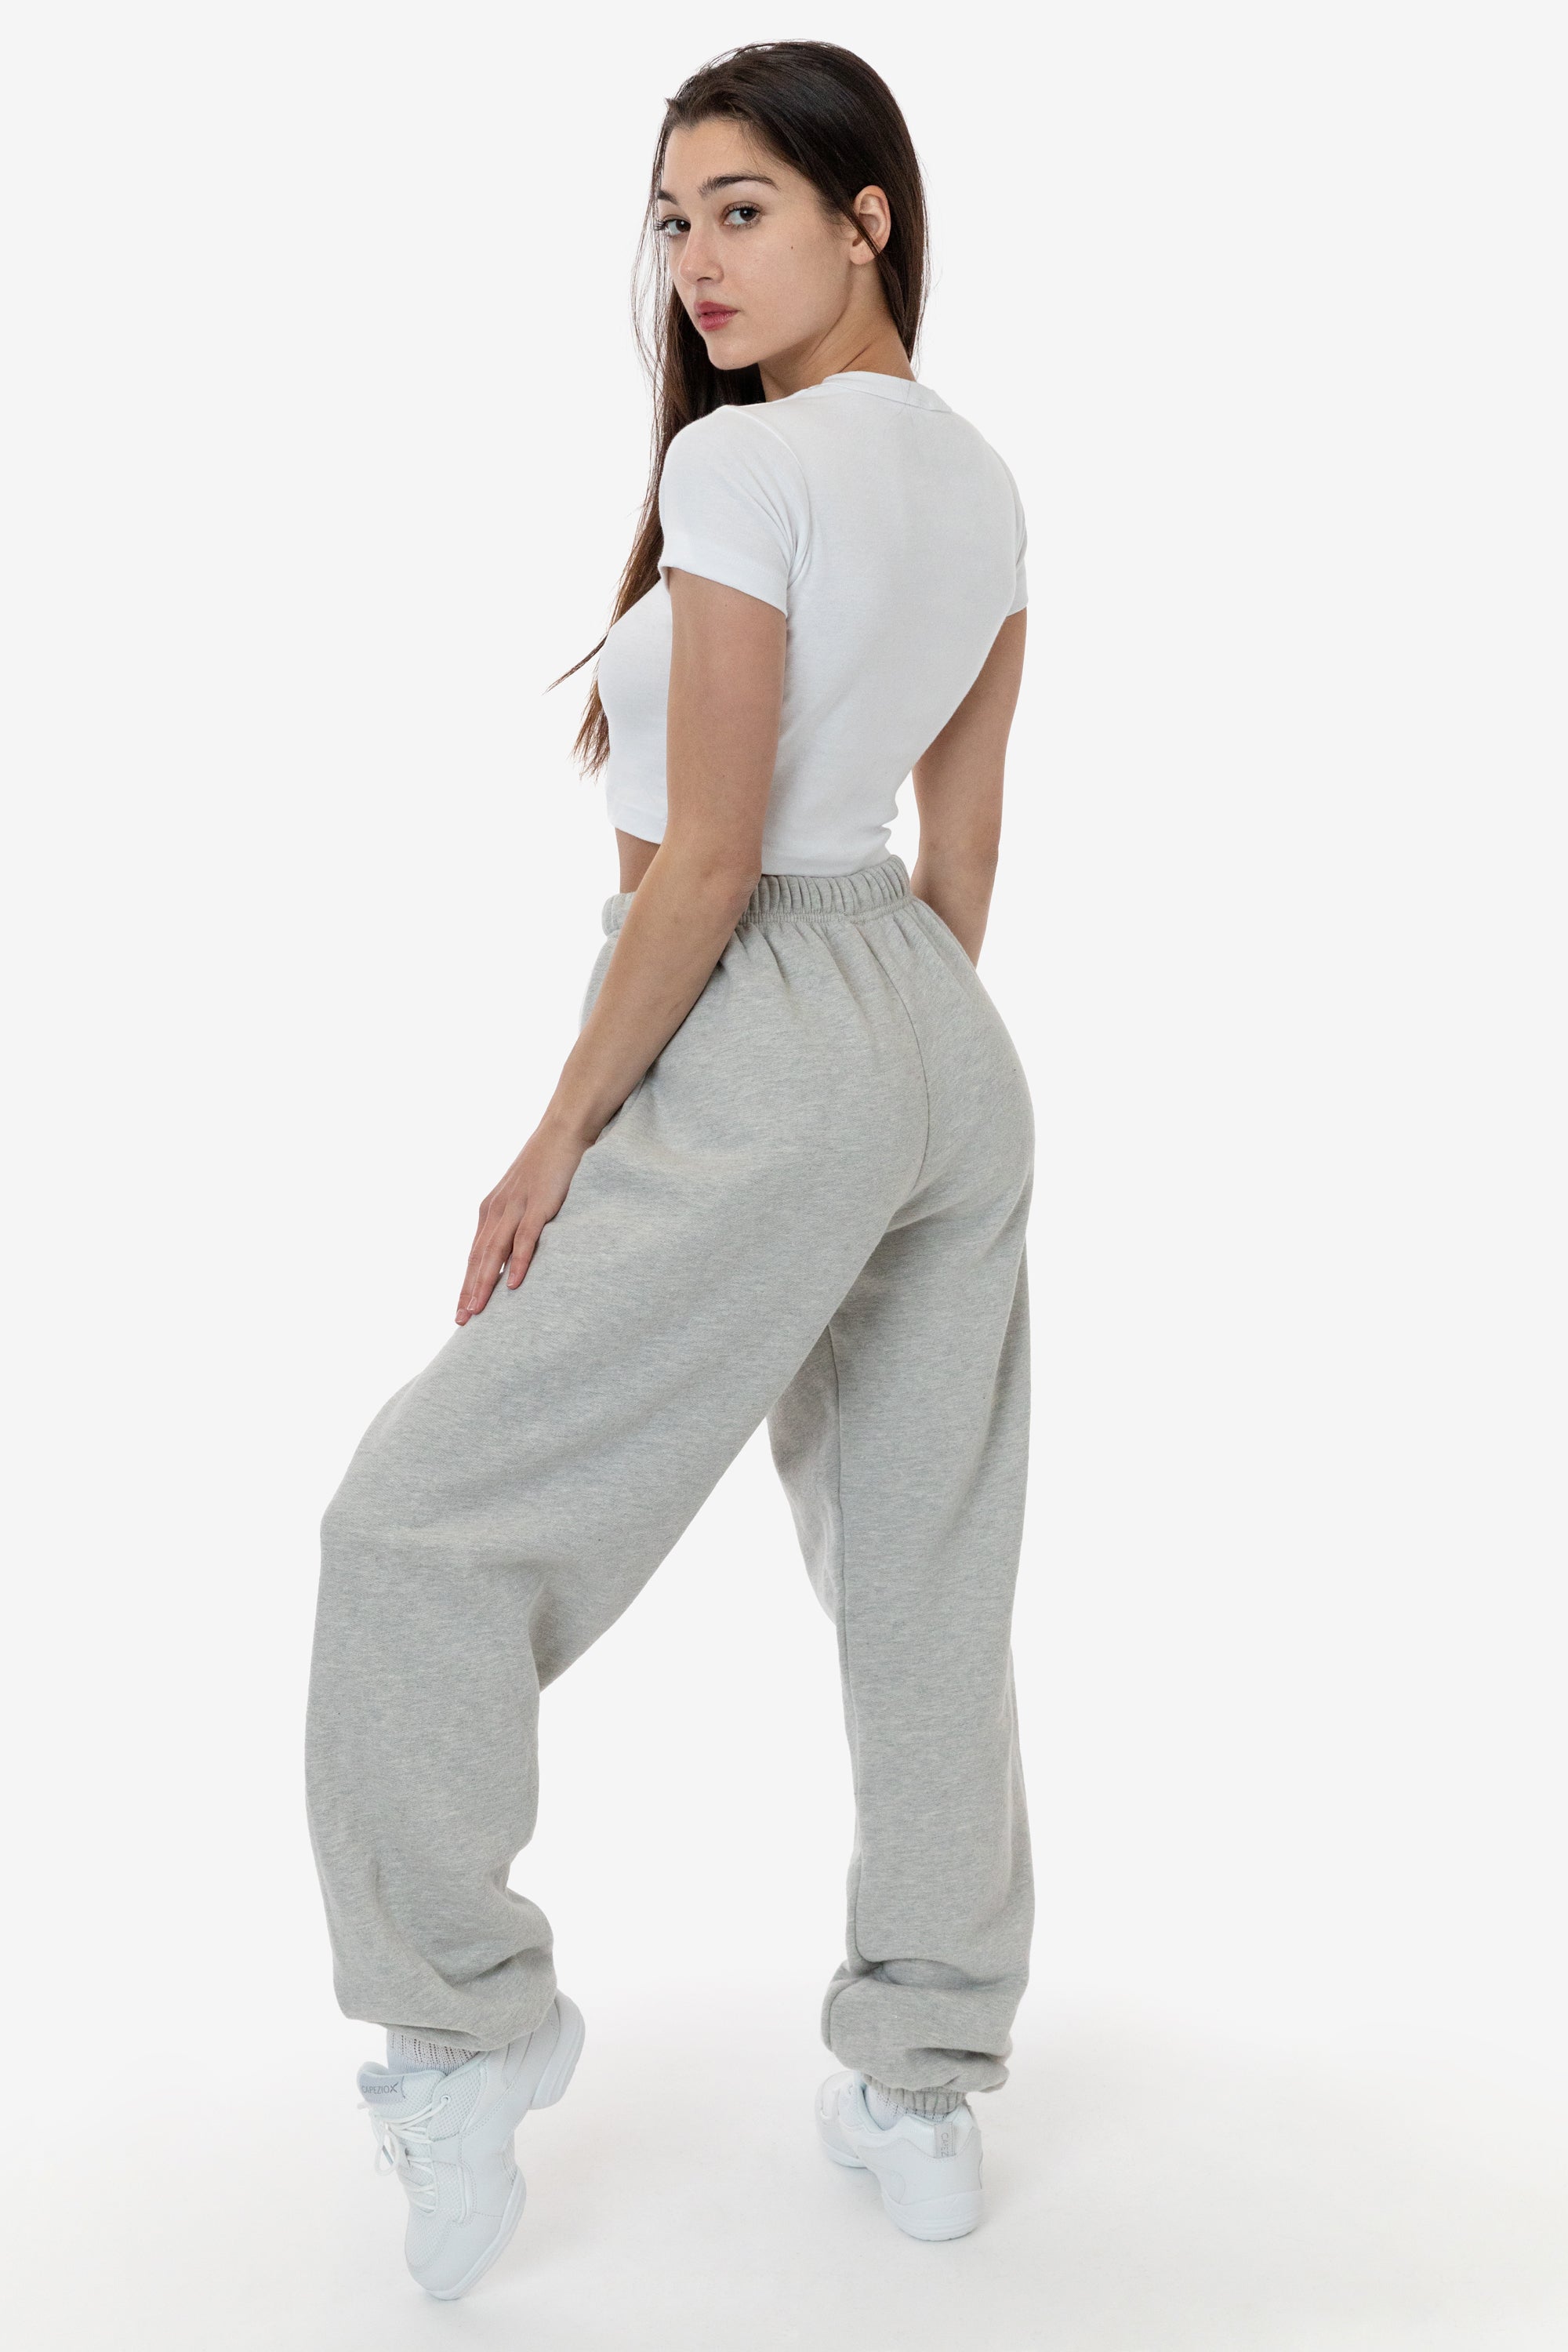 Trending Wholesale ladies joggers sale At Affordable Prices